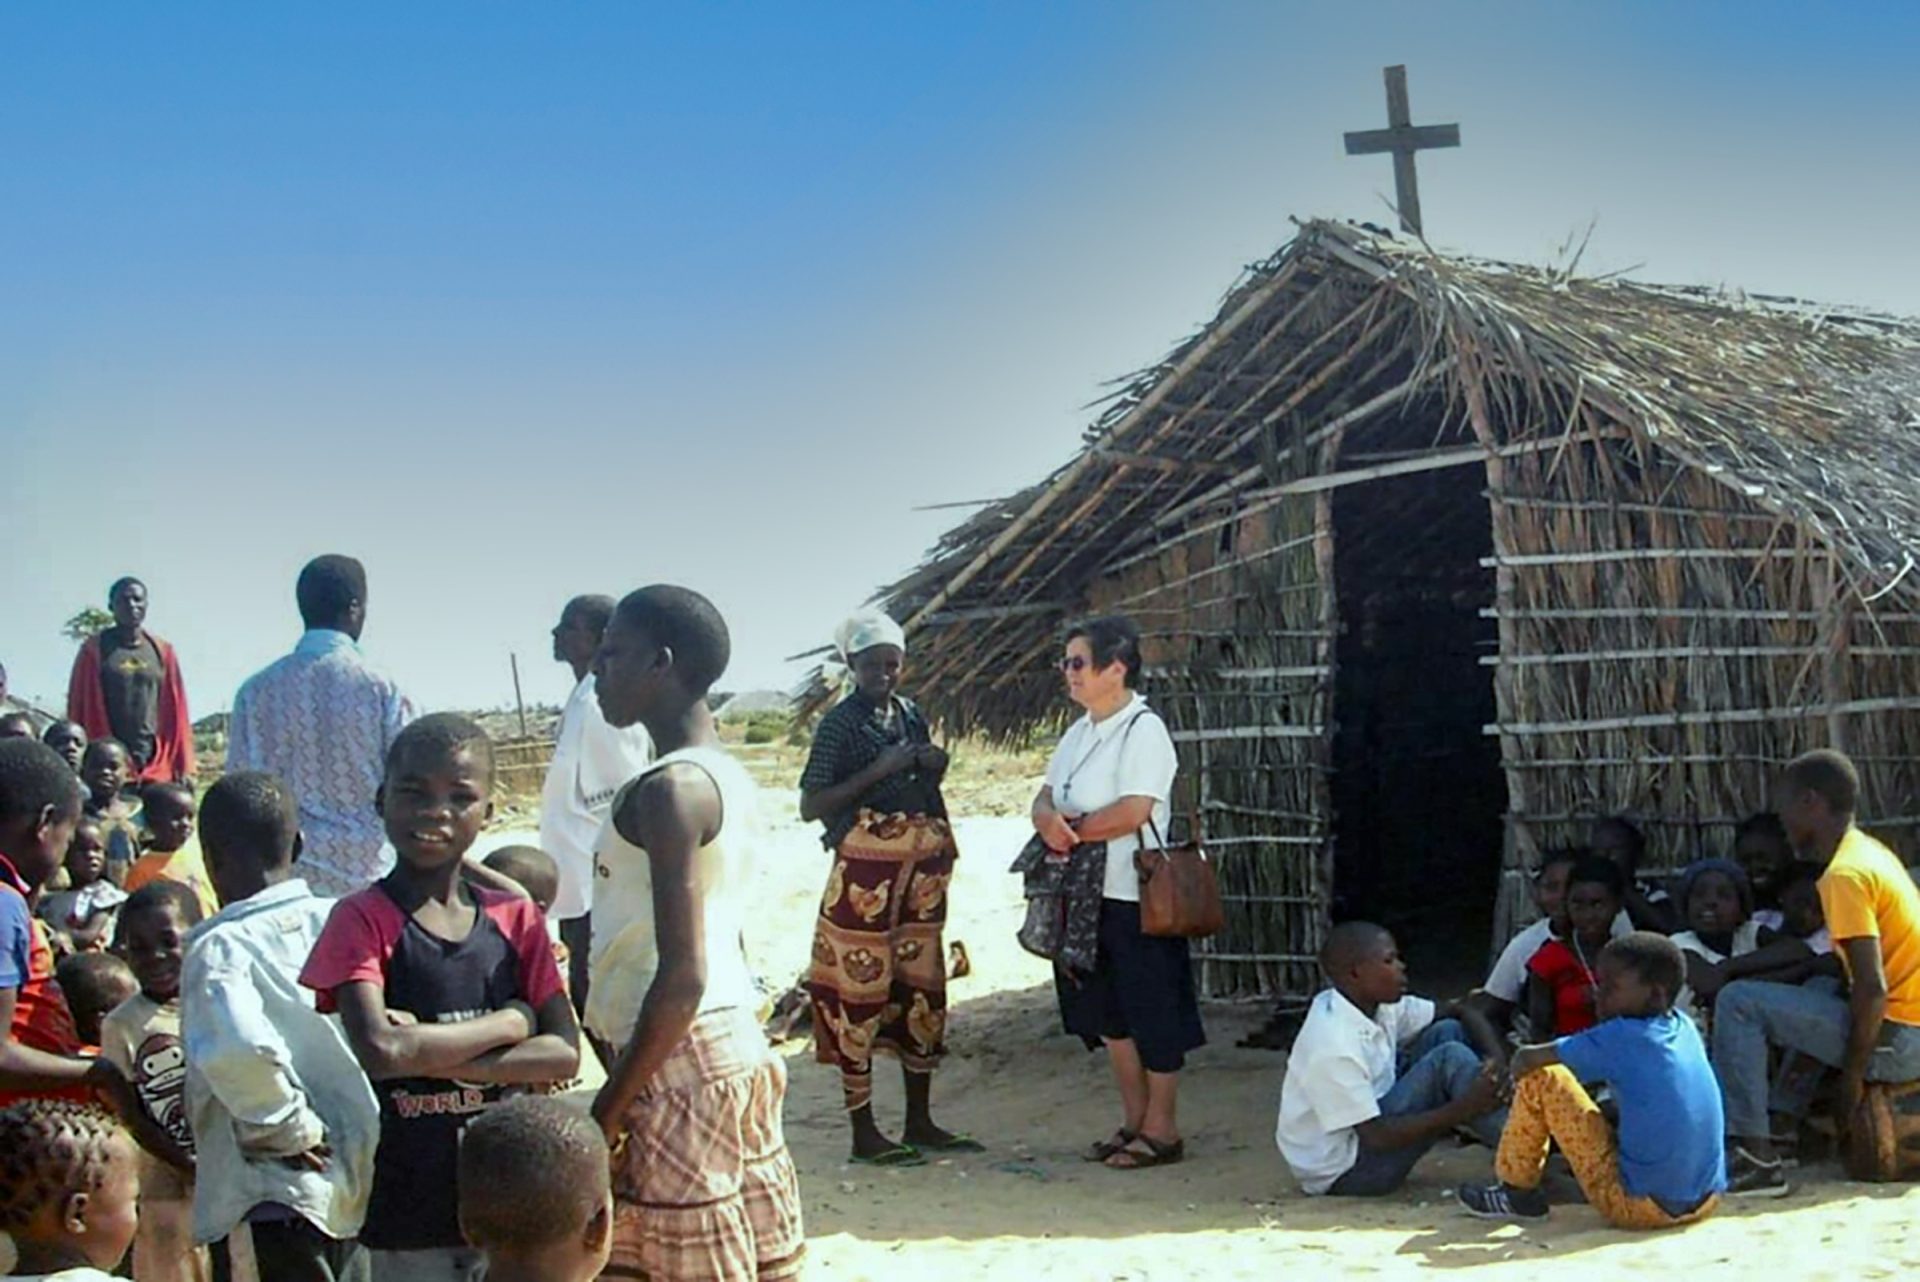 Sister Maria de Coppi stands in front of a thatched roof chapel in a remote region of  Mozambique. She is with many people from the region.